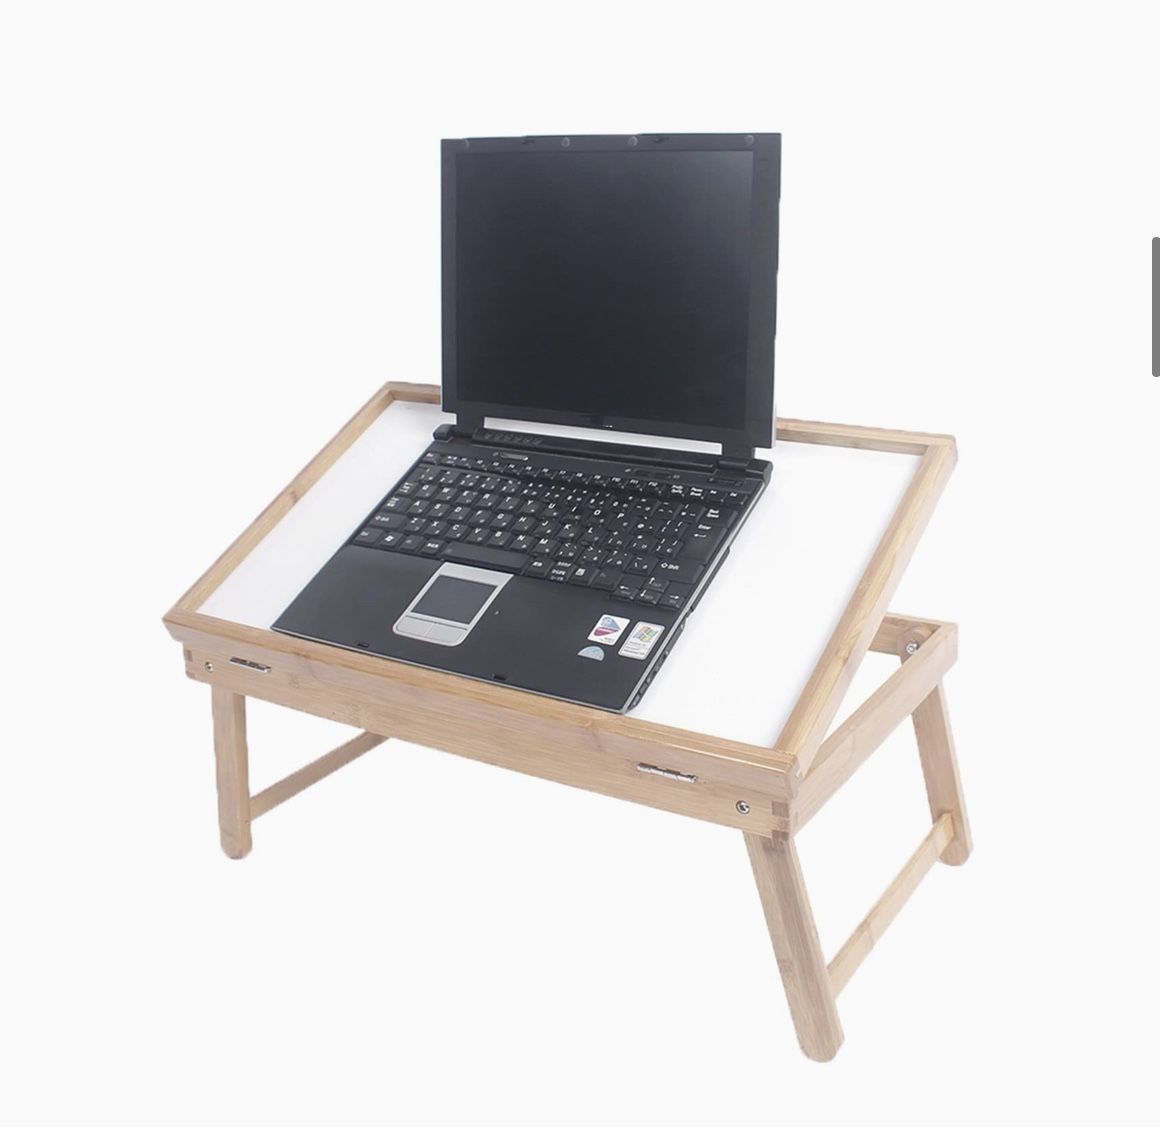 Wooden Bed Breakfast Table/laptop Table